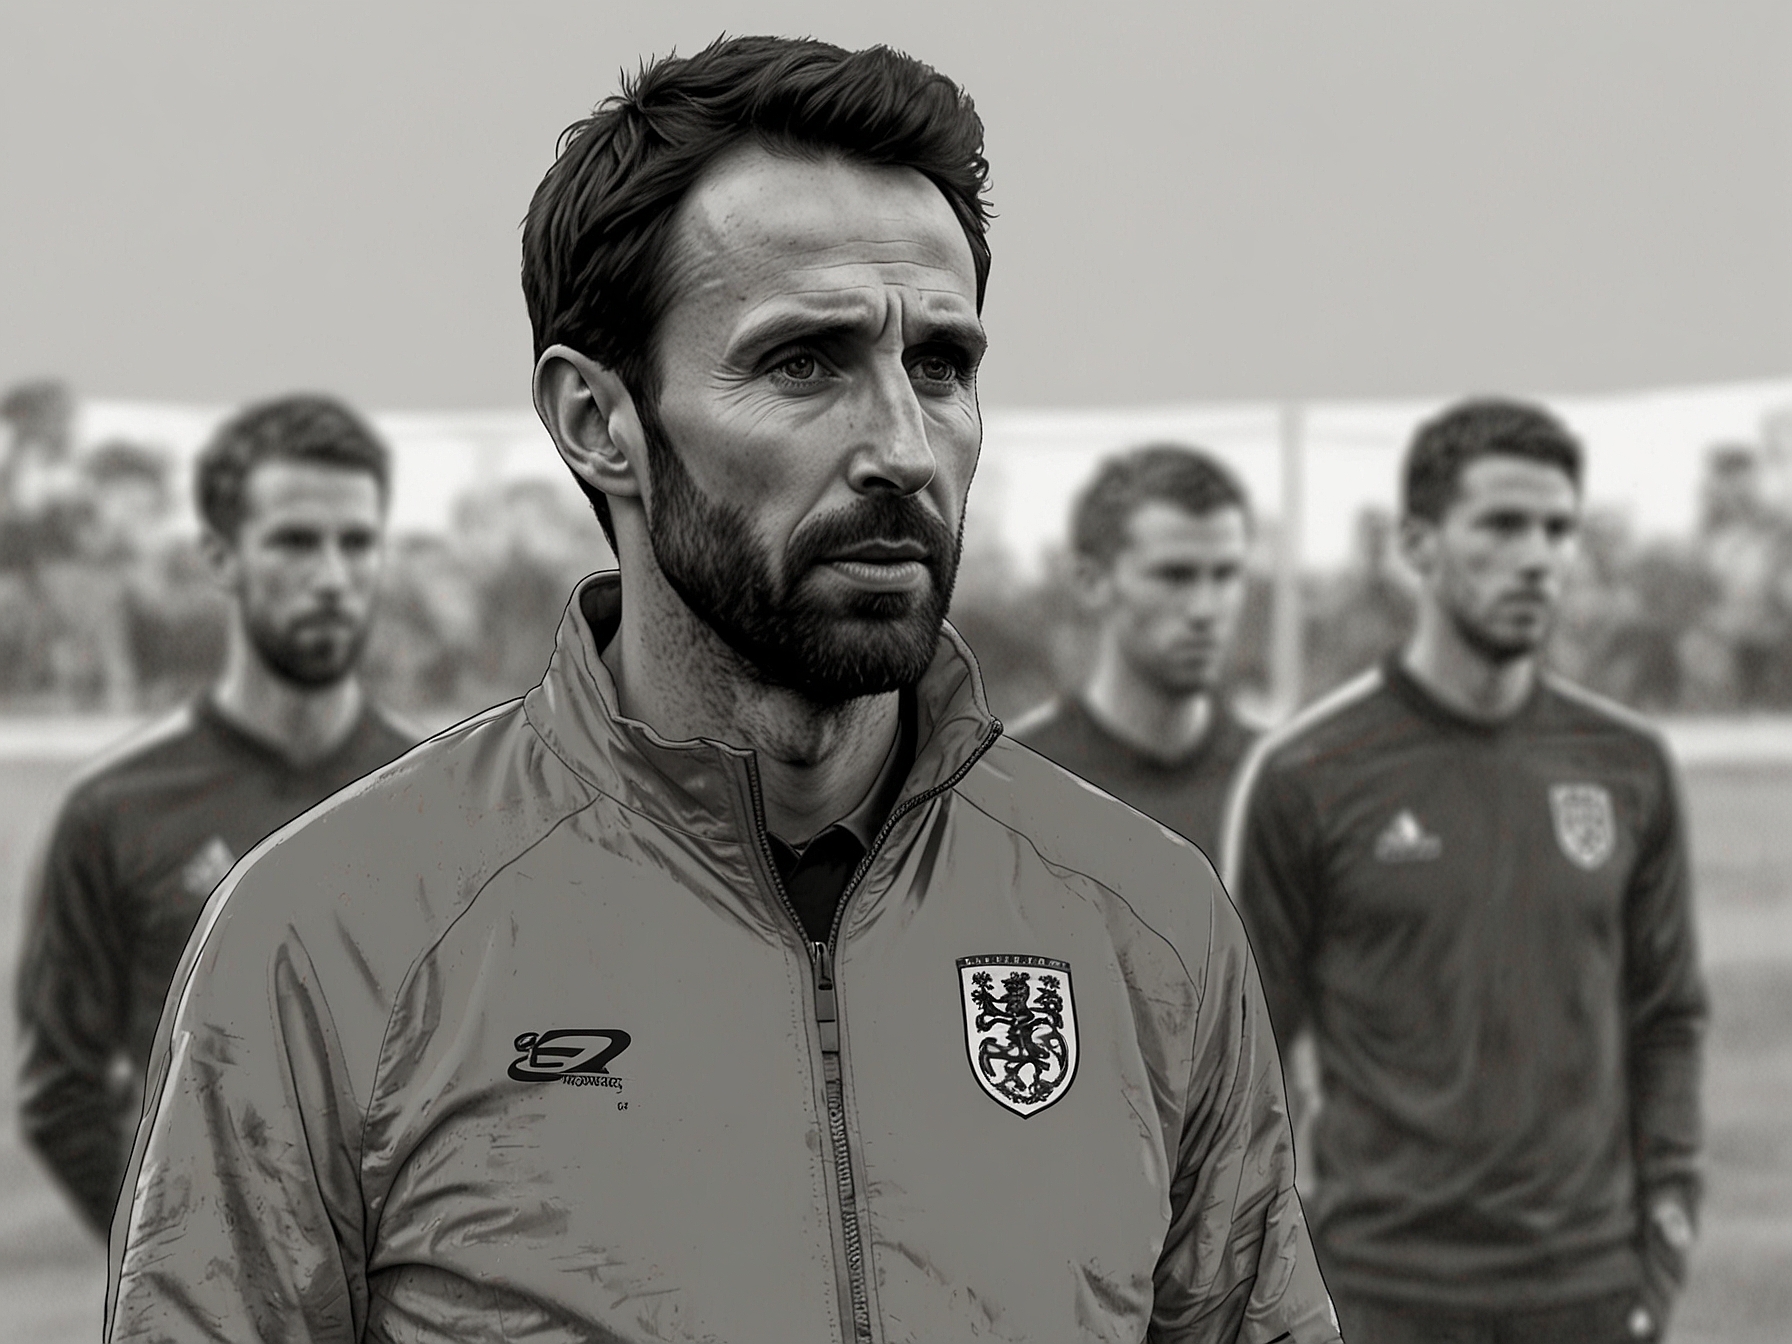 Gareth Southgate, the England manager, observing a training session with players, highlighting the preparation and strategic planning for the crucial encounter against Slovakia in Euro 2024.